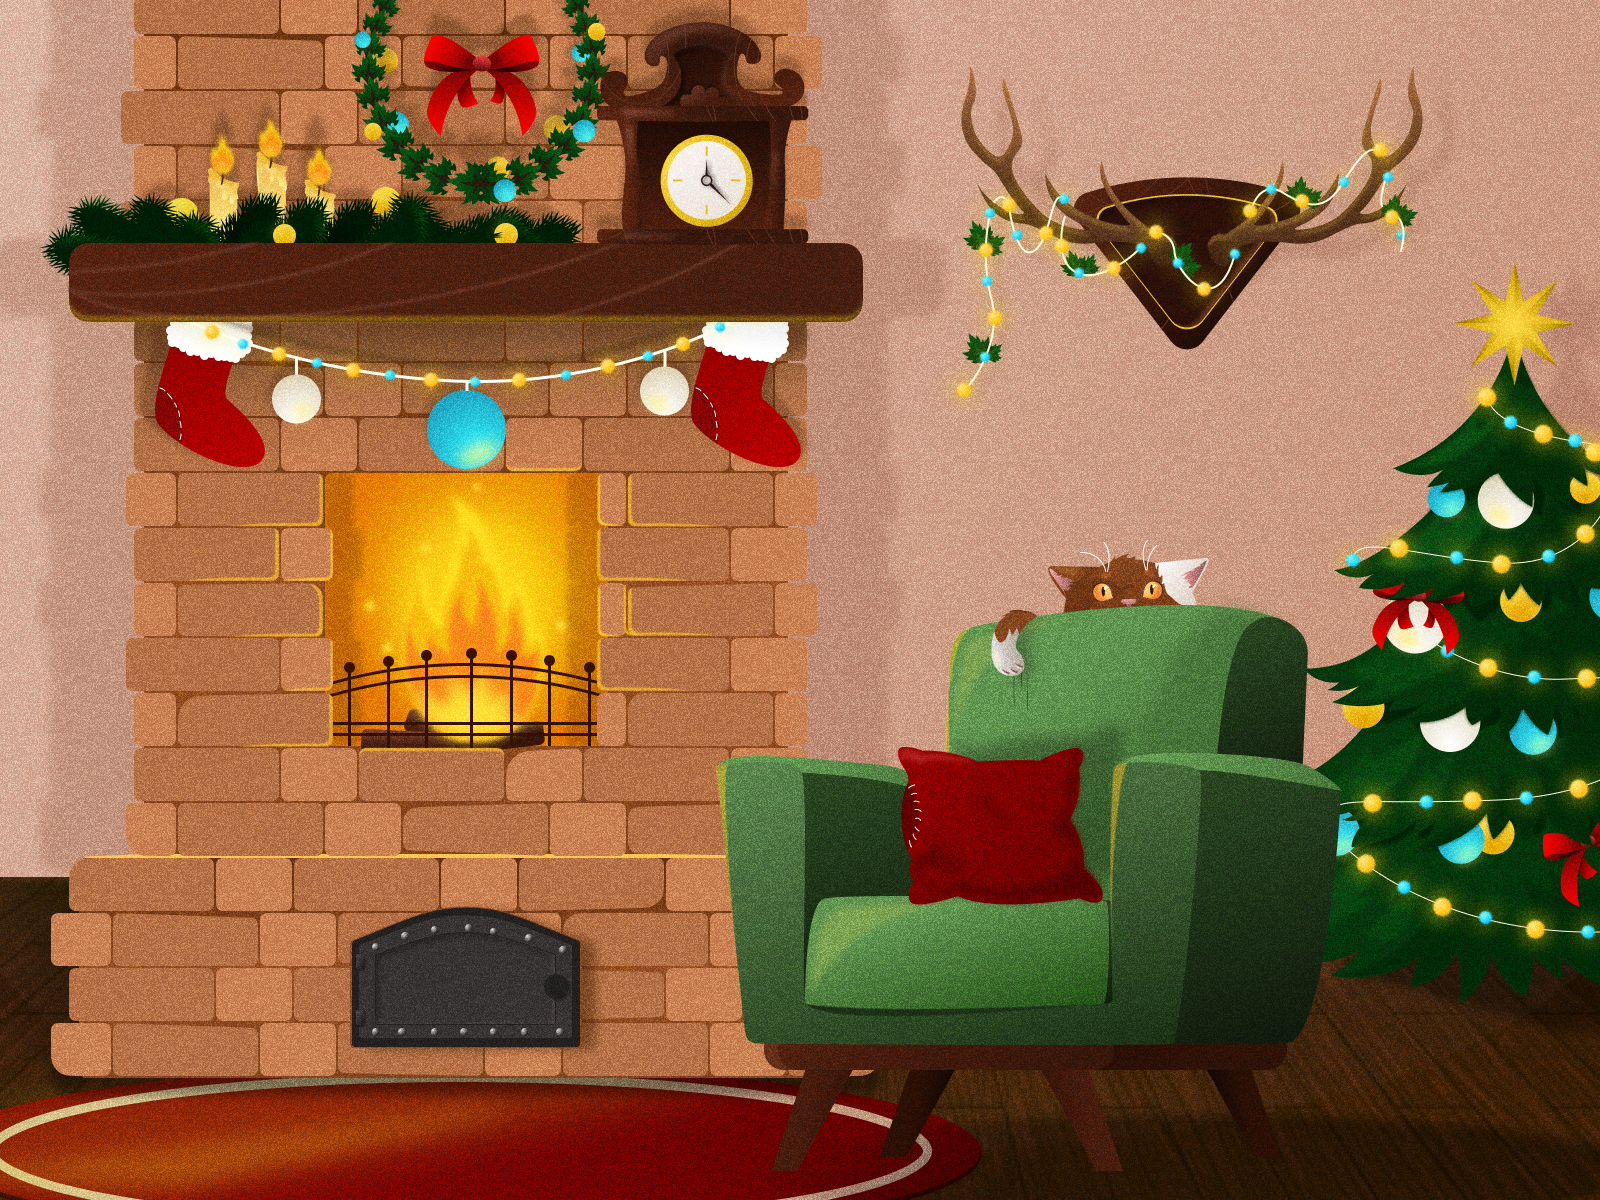 Cat and fireplace by Maria on Dribbble